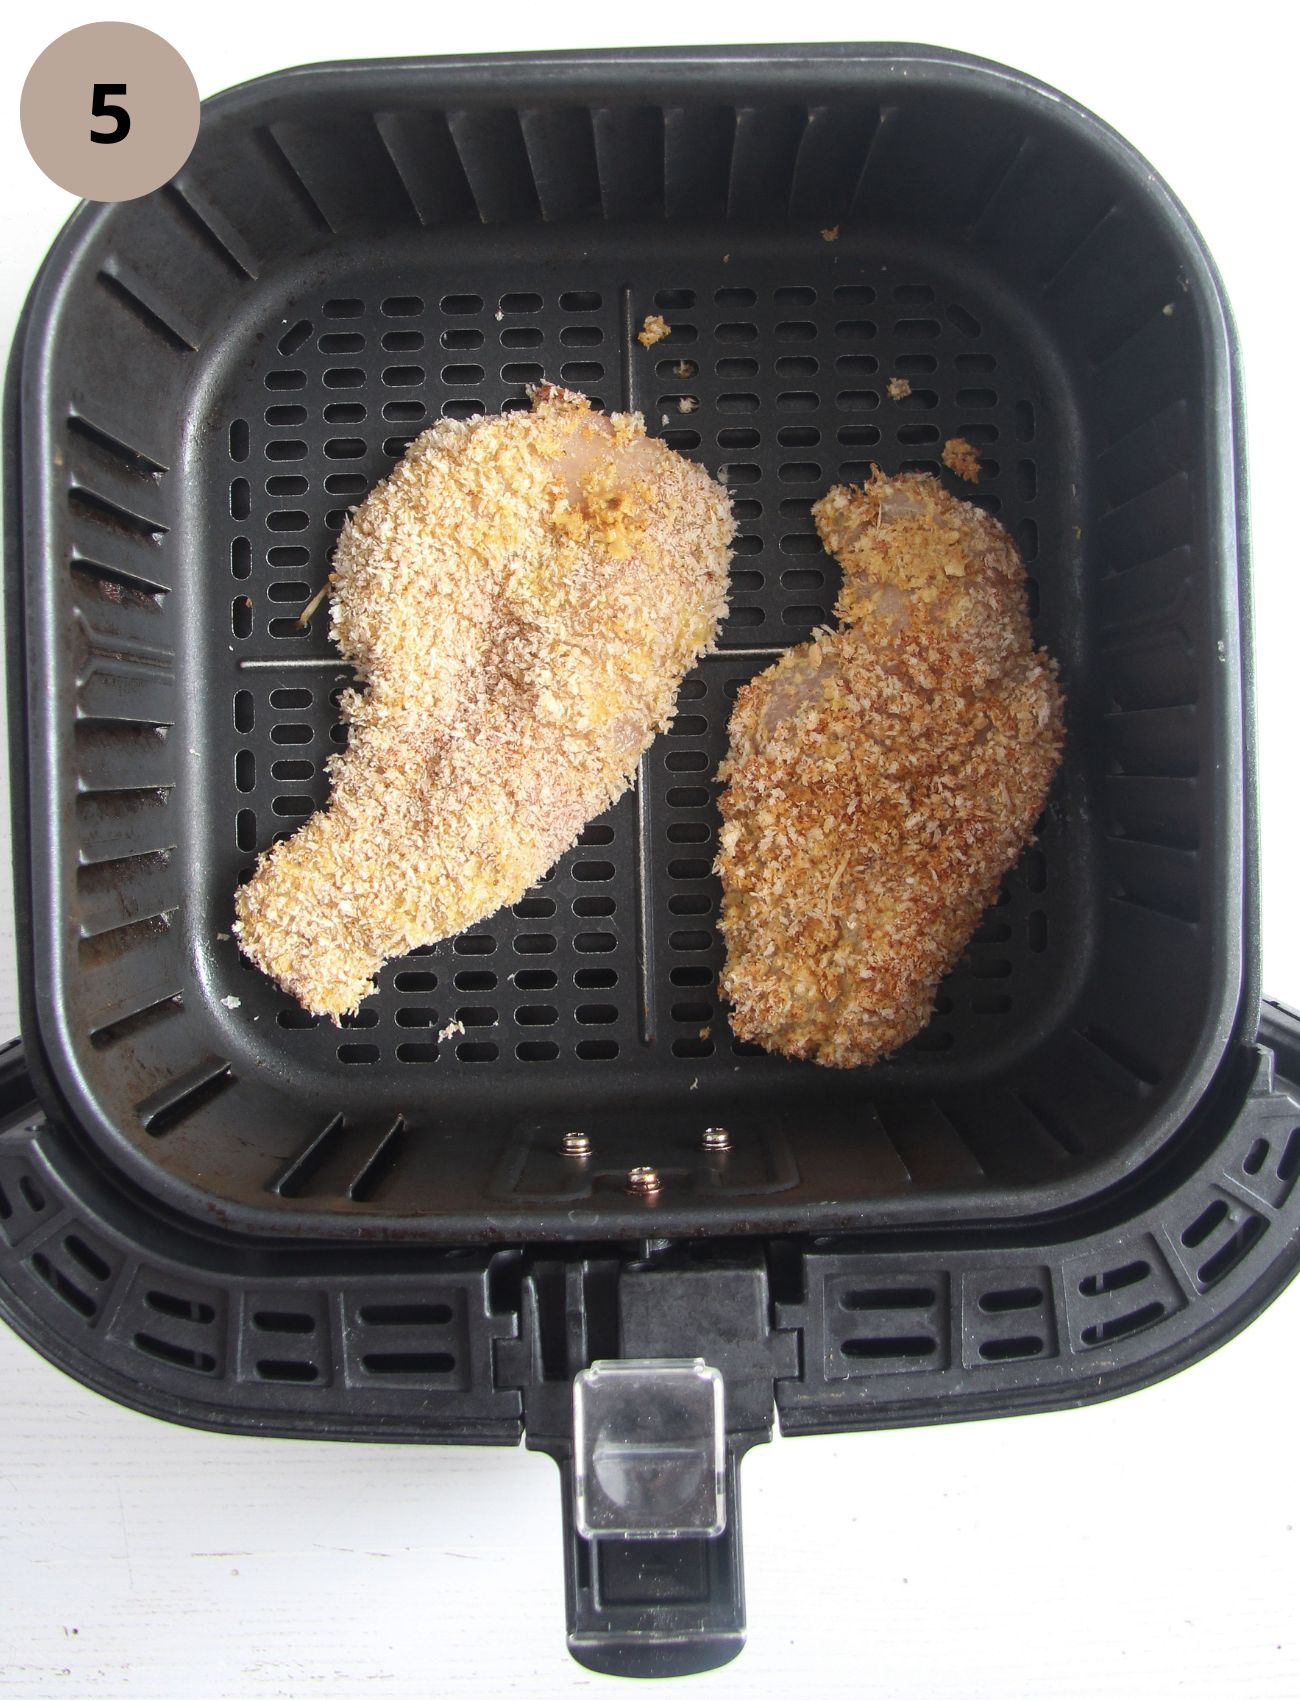 two uncooked breaded chicken slices in the basket of the air fryer.